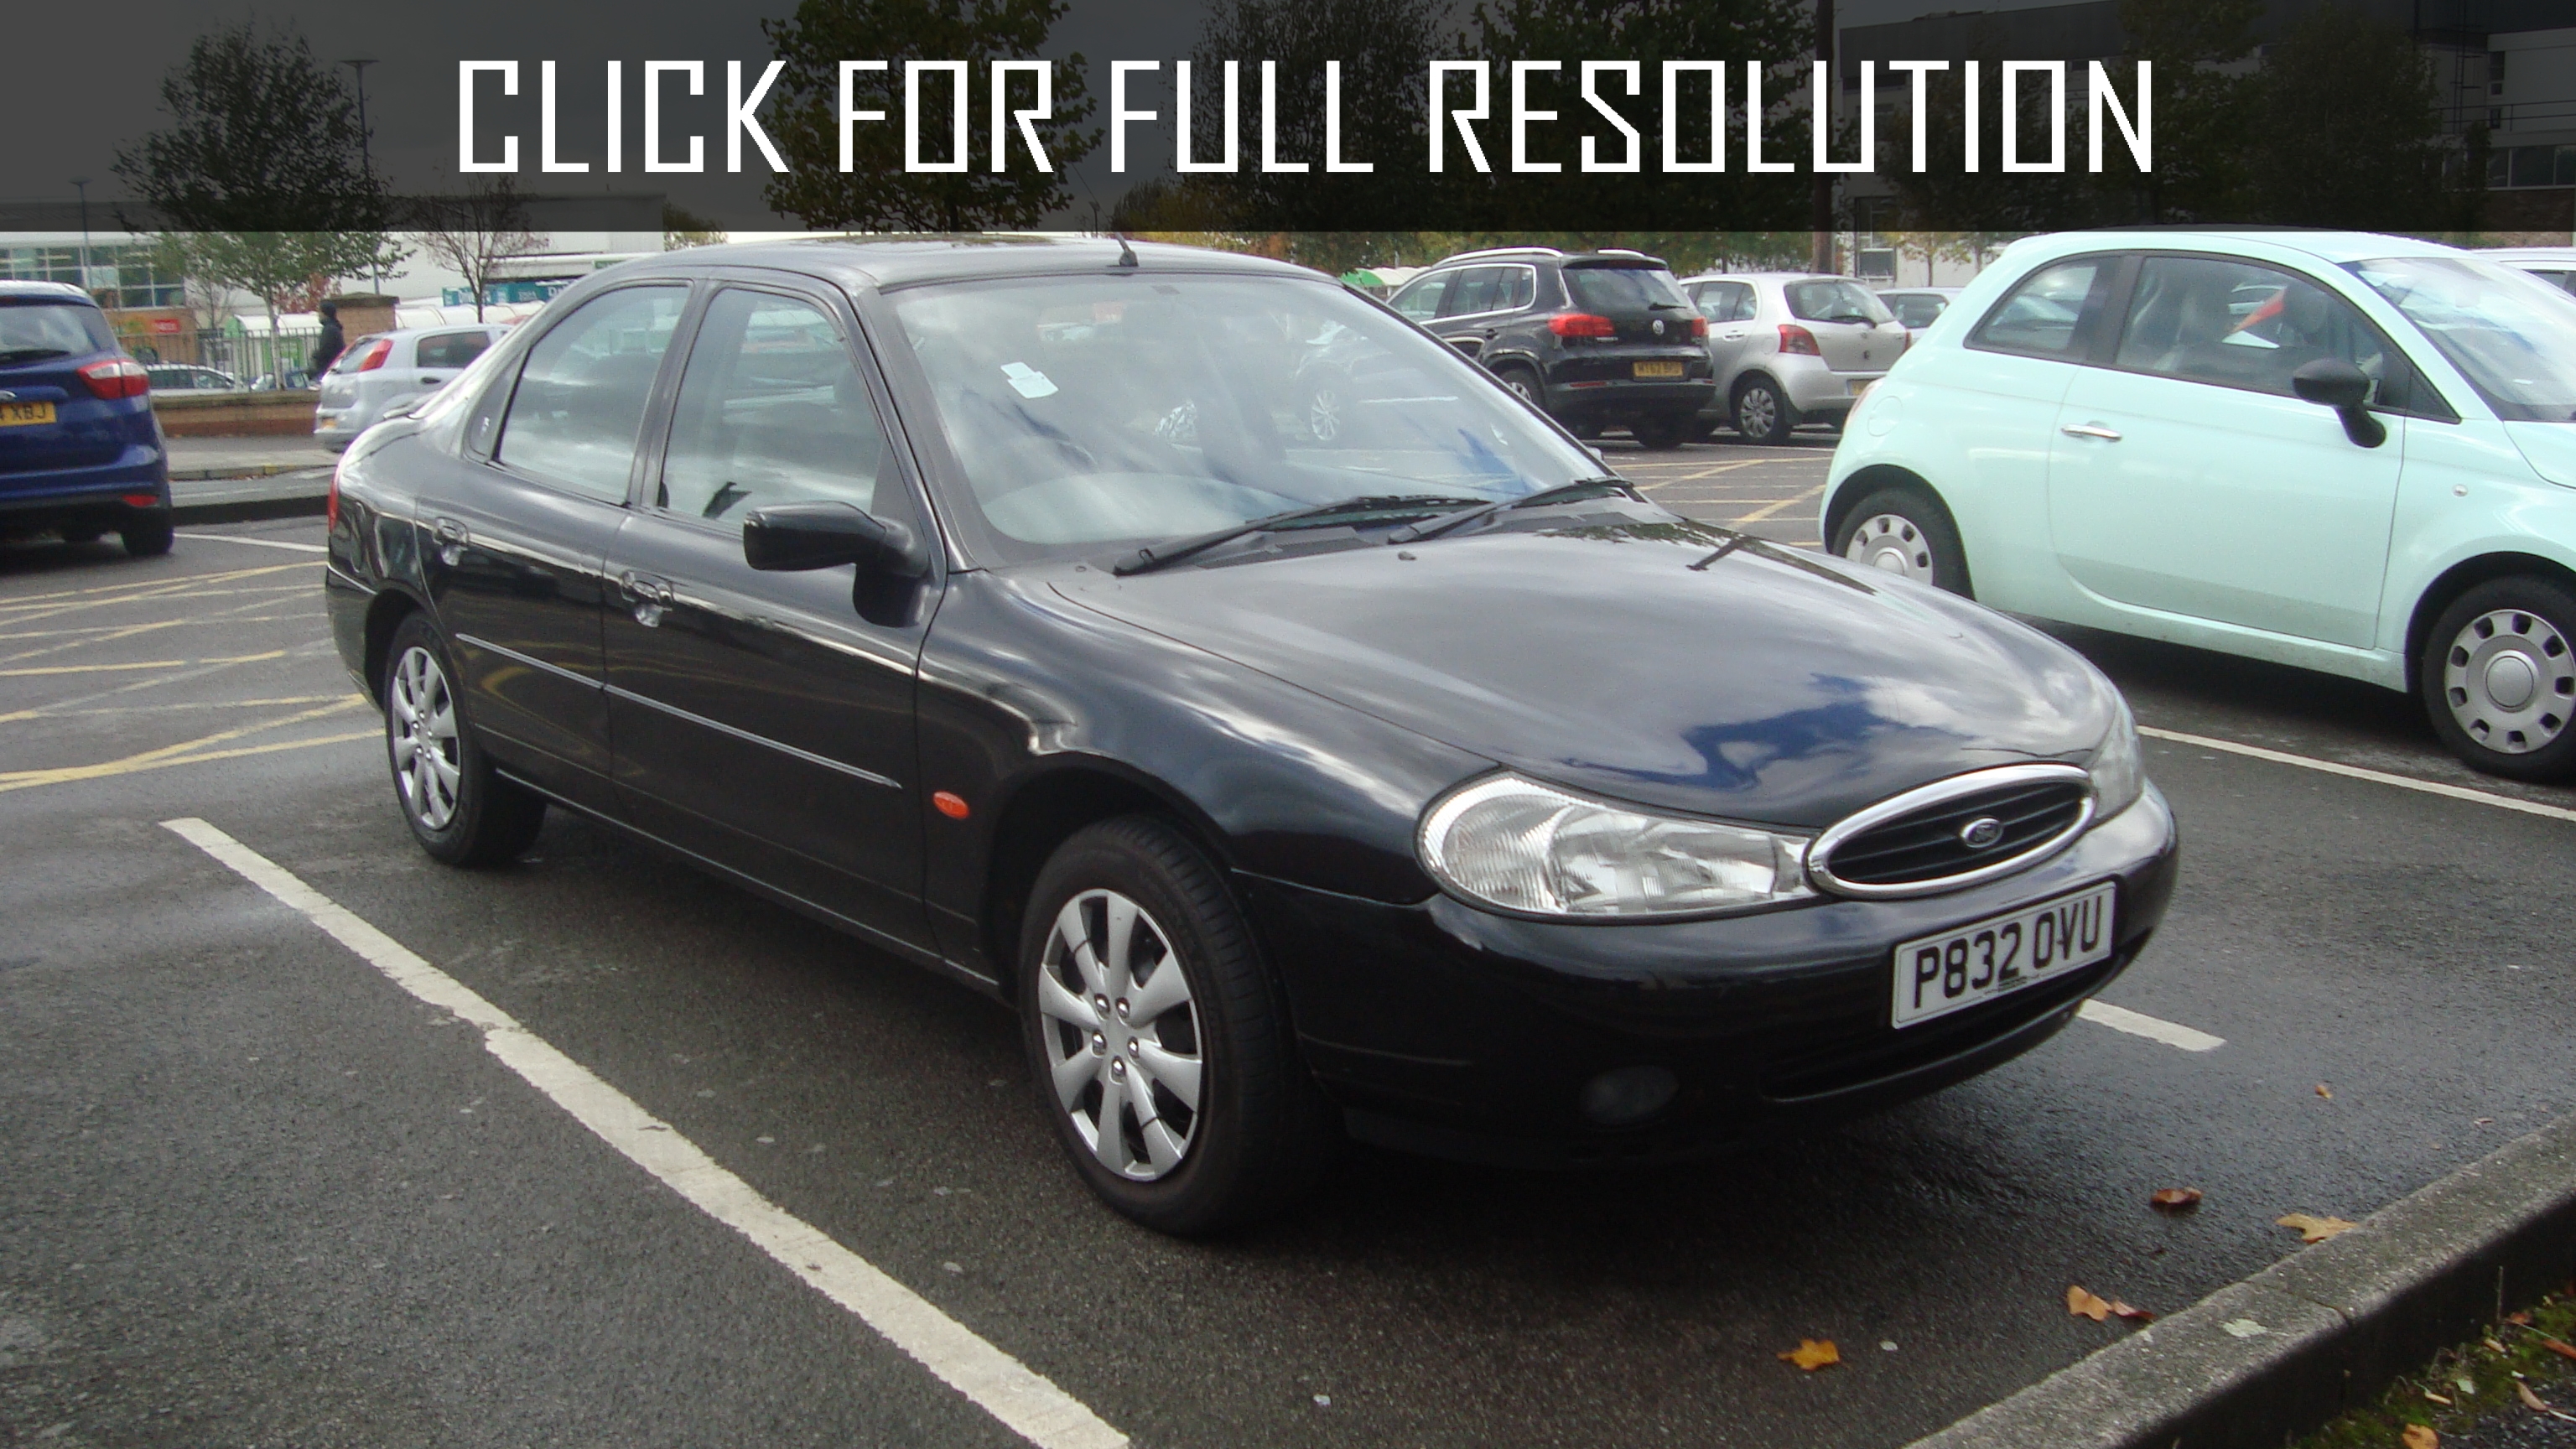 Ford Mondeo 1.8 Td amazing photo gallery, some